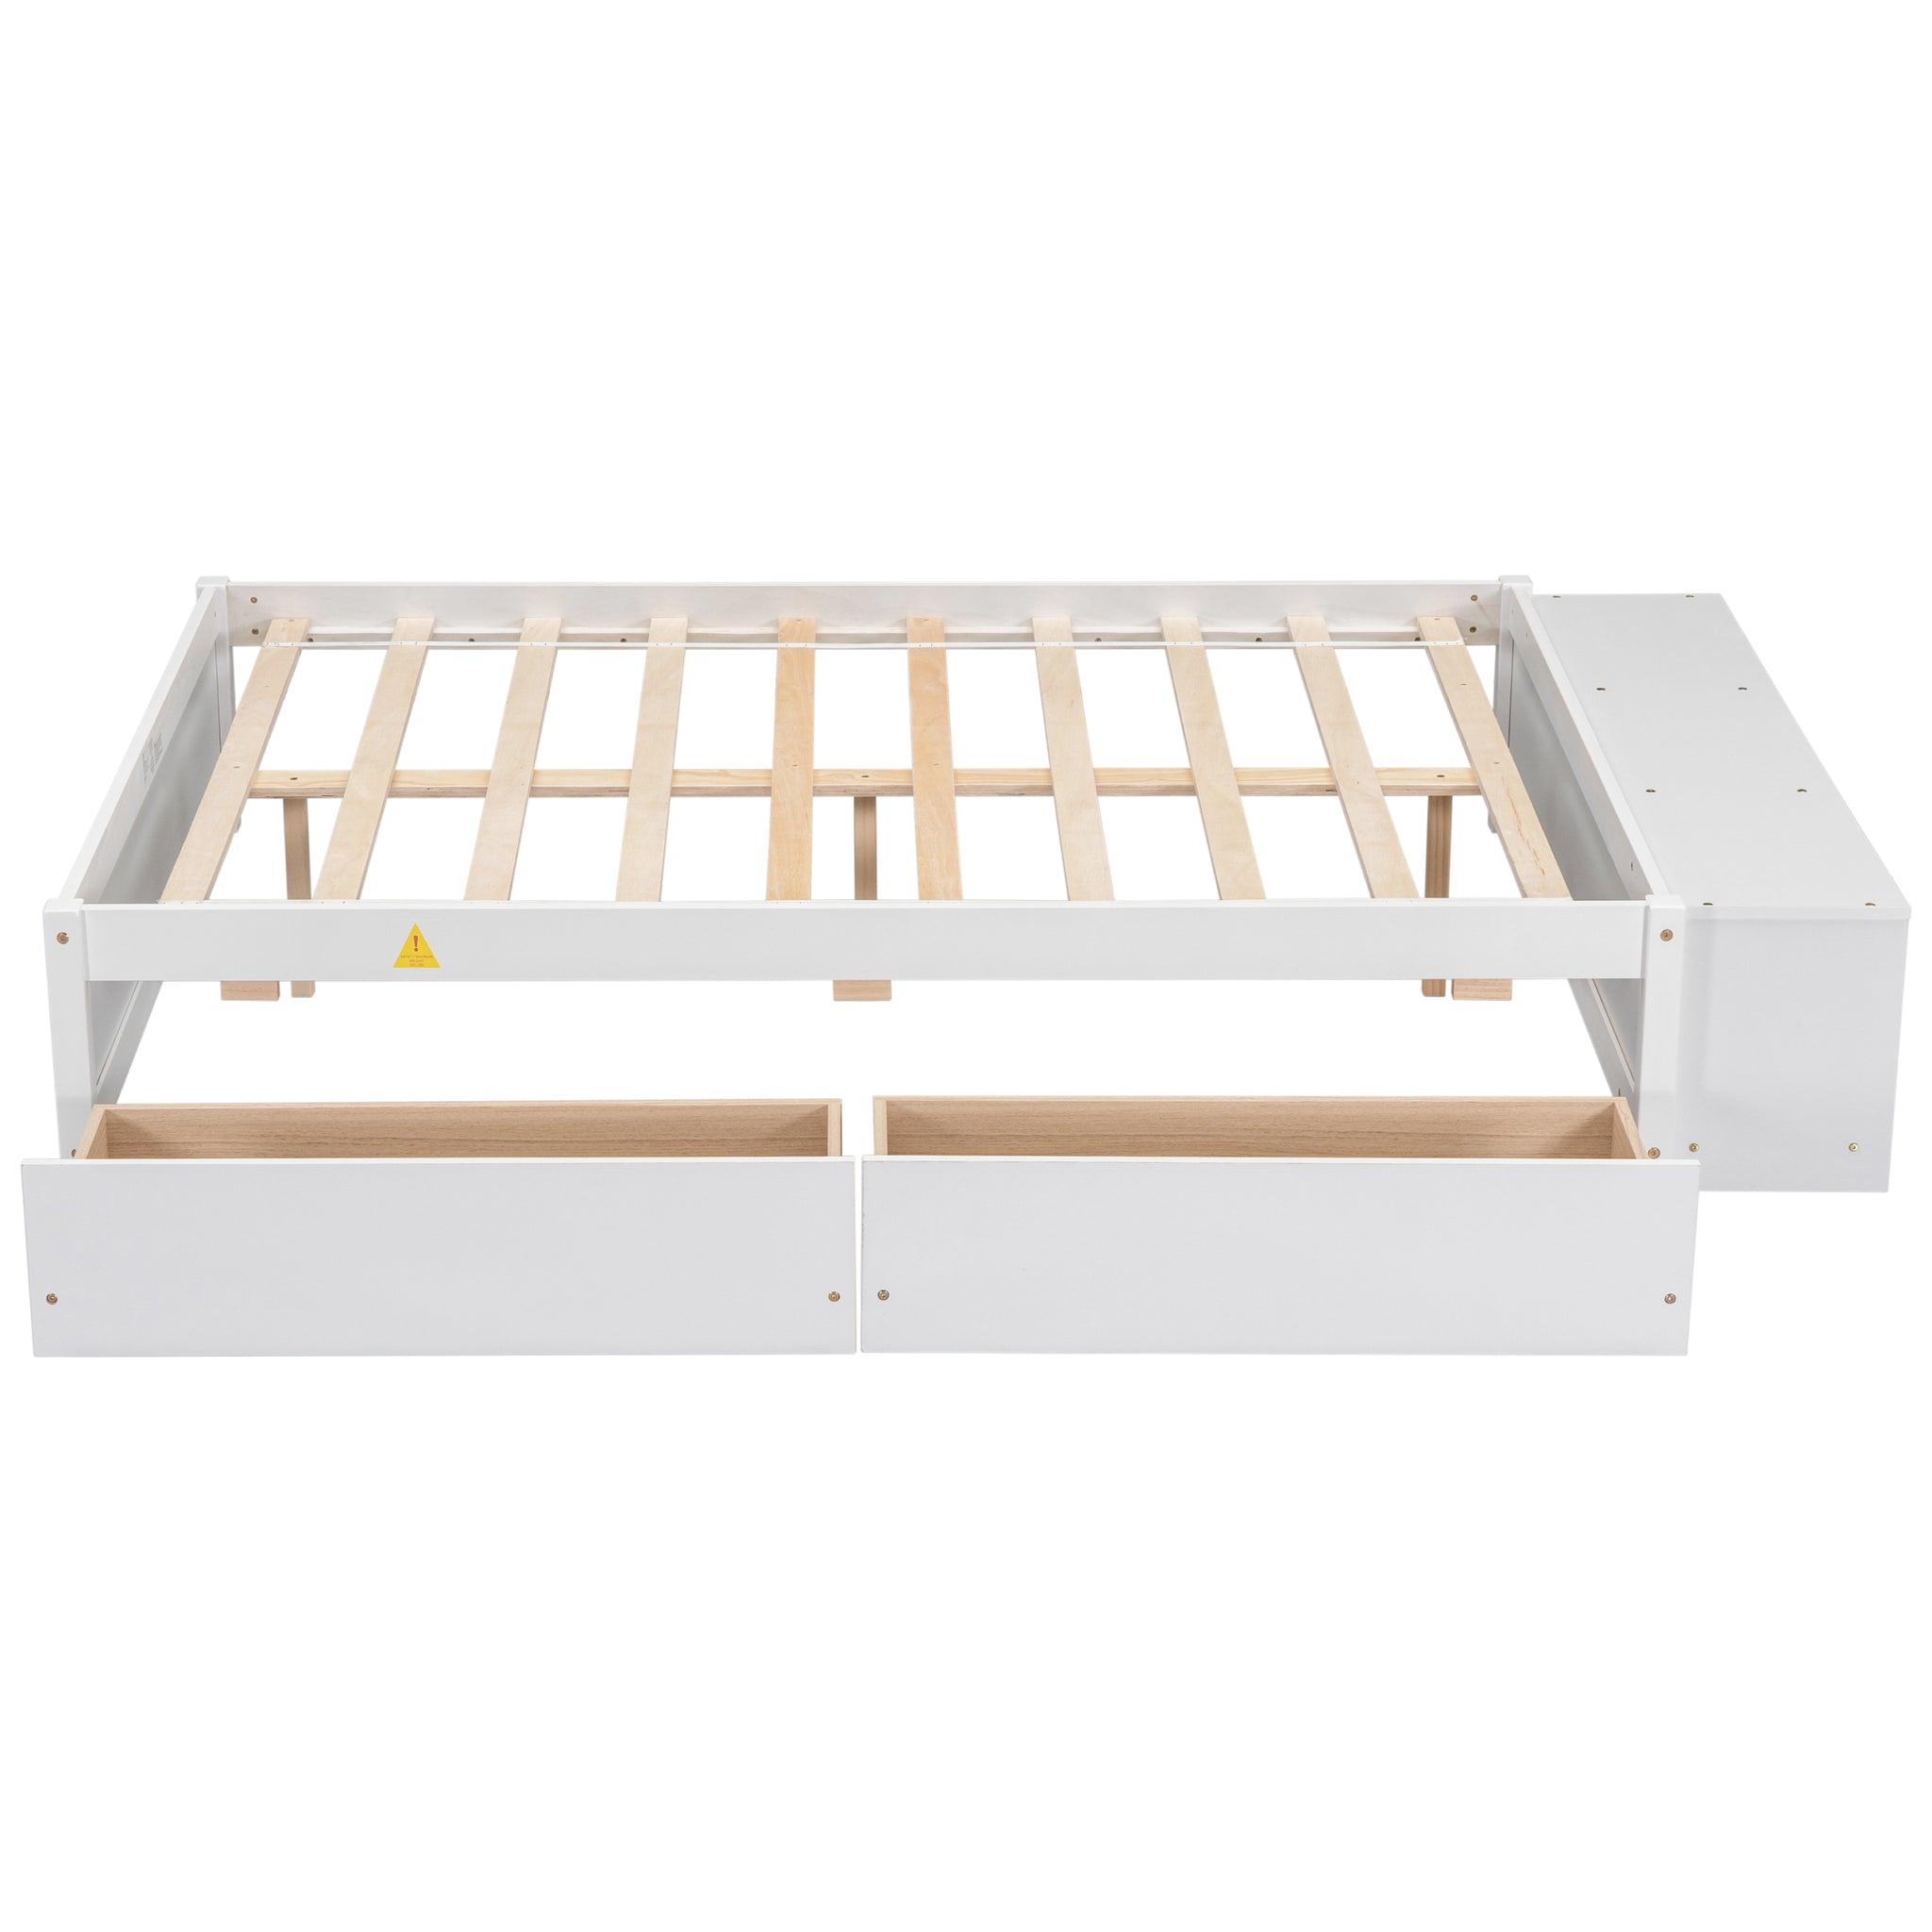 Full Size Bed with Storage Case, 2 Storage drawers full-white-wood-bedroom-american design-pine-pine